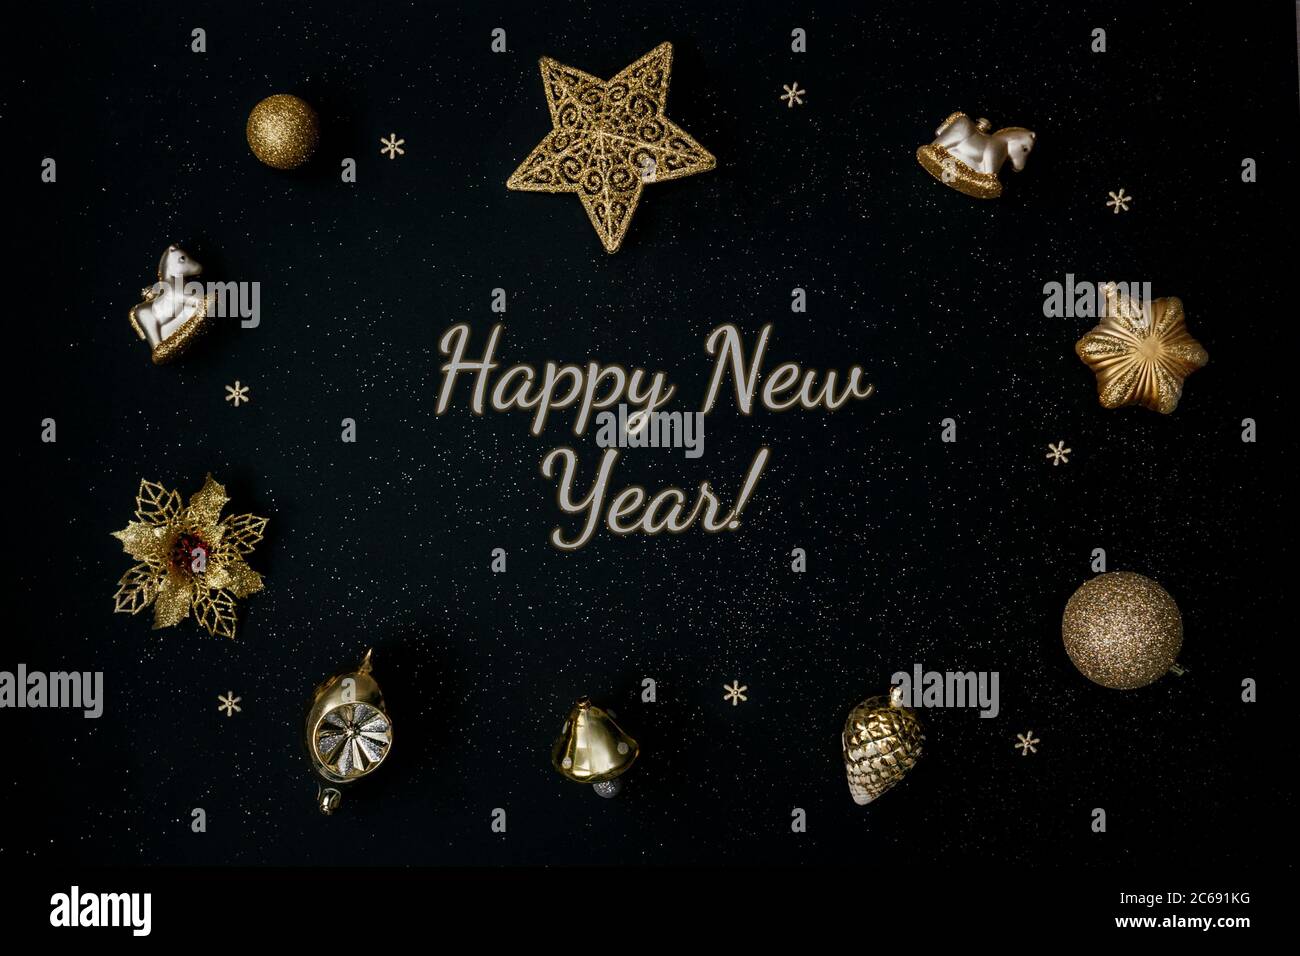 Beautiful new year golden decoration with baubles on black background. Flat lay design. Lettering Happy New Year. Stock Photo